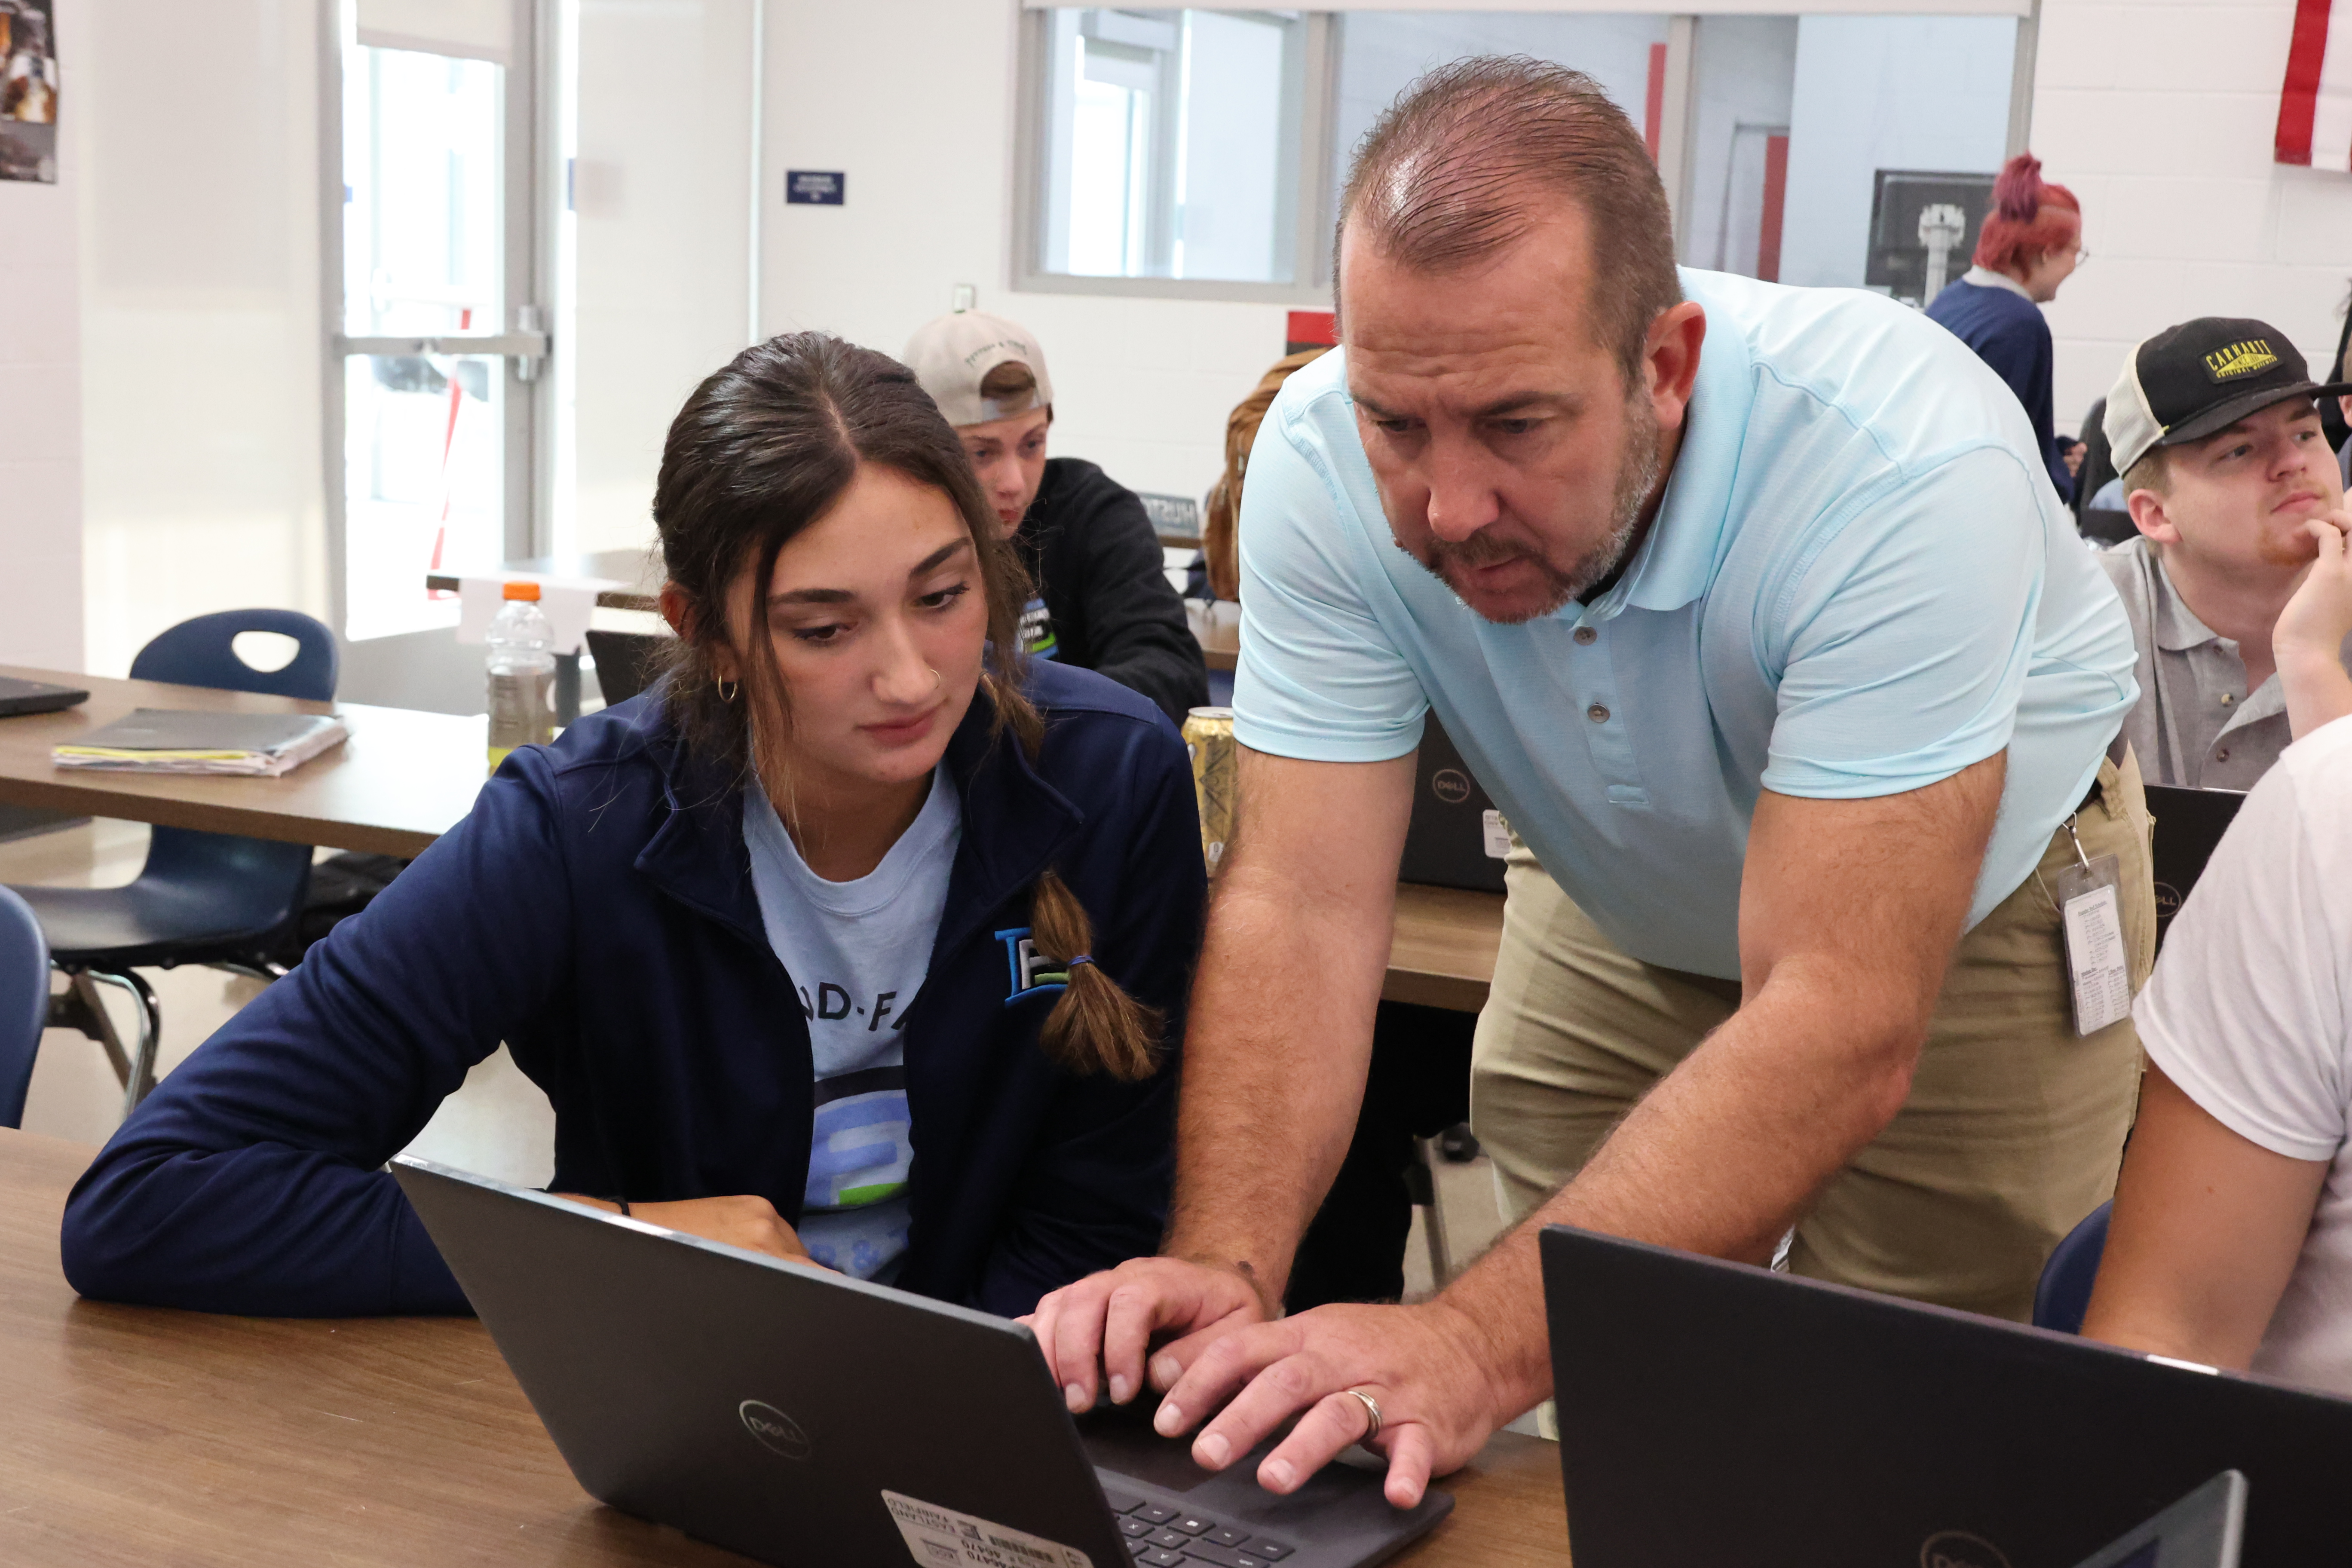 An instructor is helping a female student navigate her Chromebook